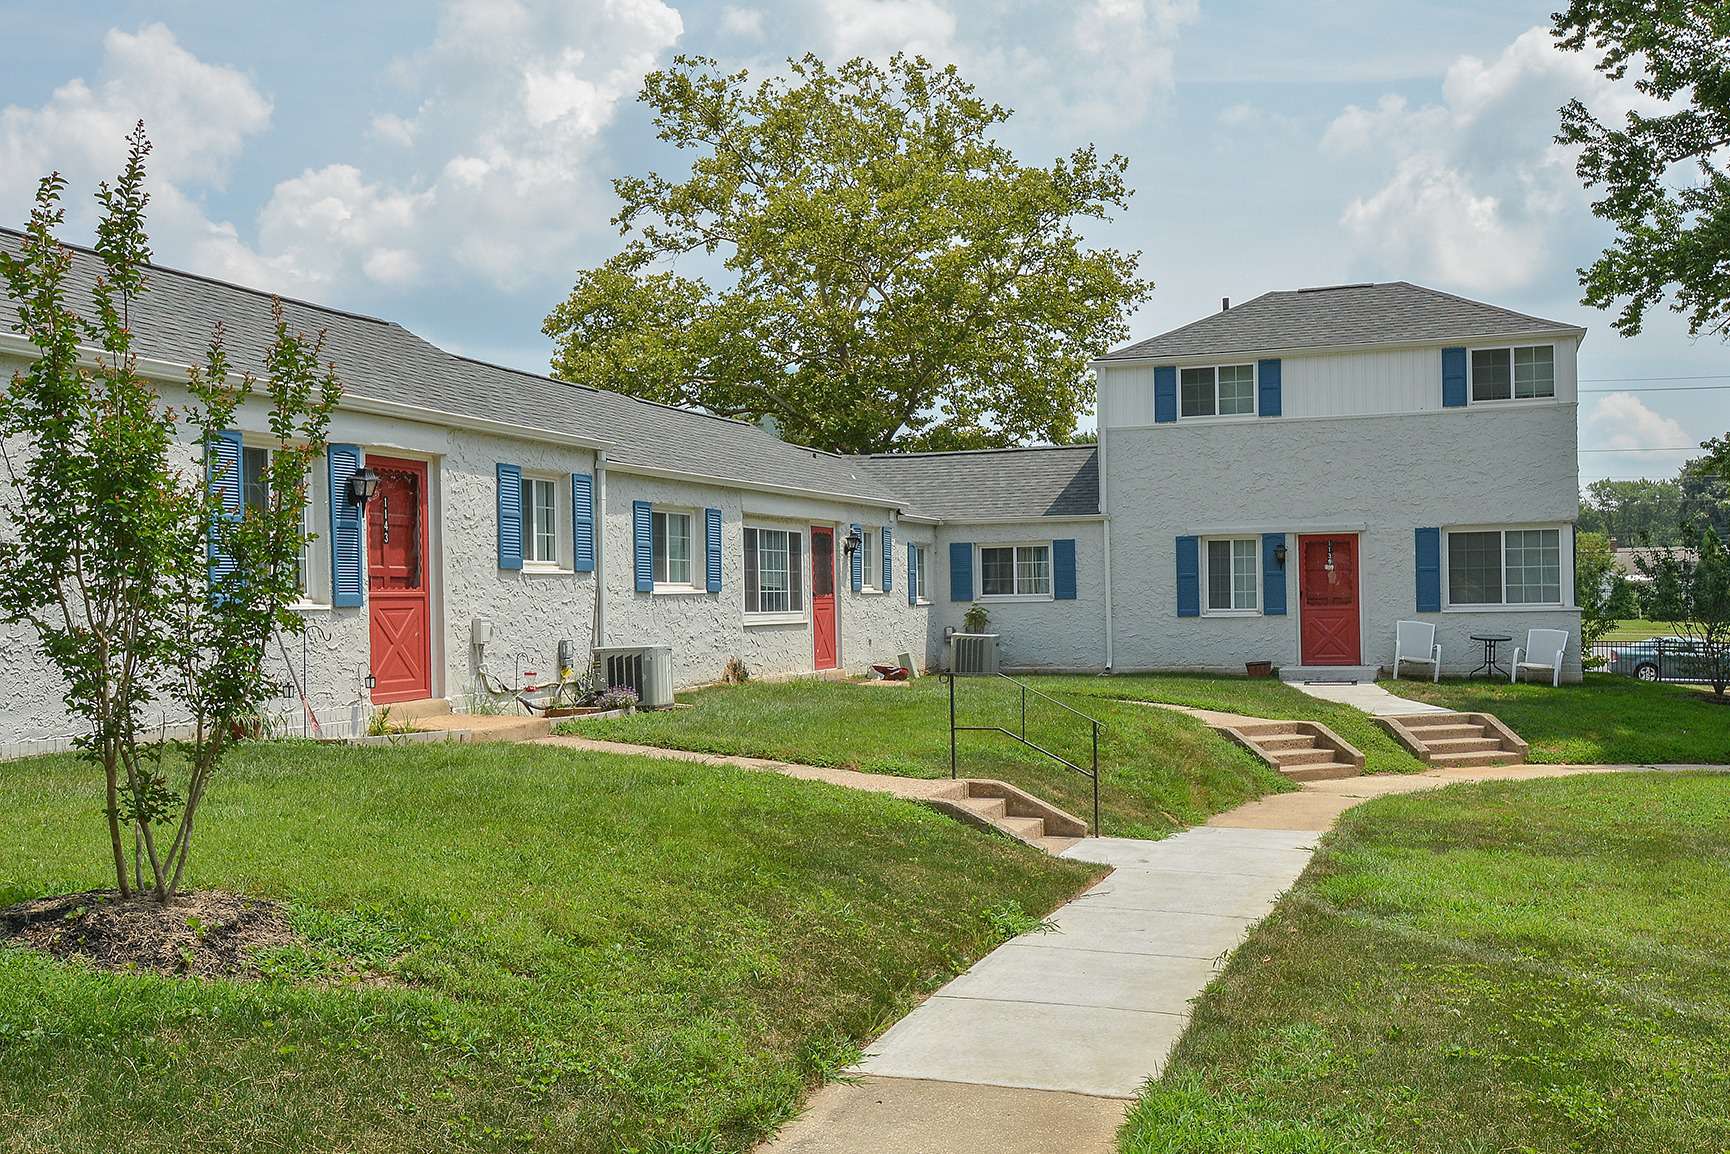 Exterior of Greenville on 141 Apartments and Townhomes in Wilmington, DE.